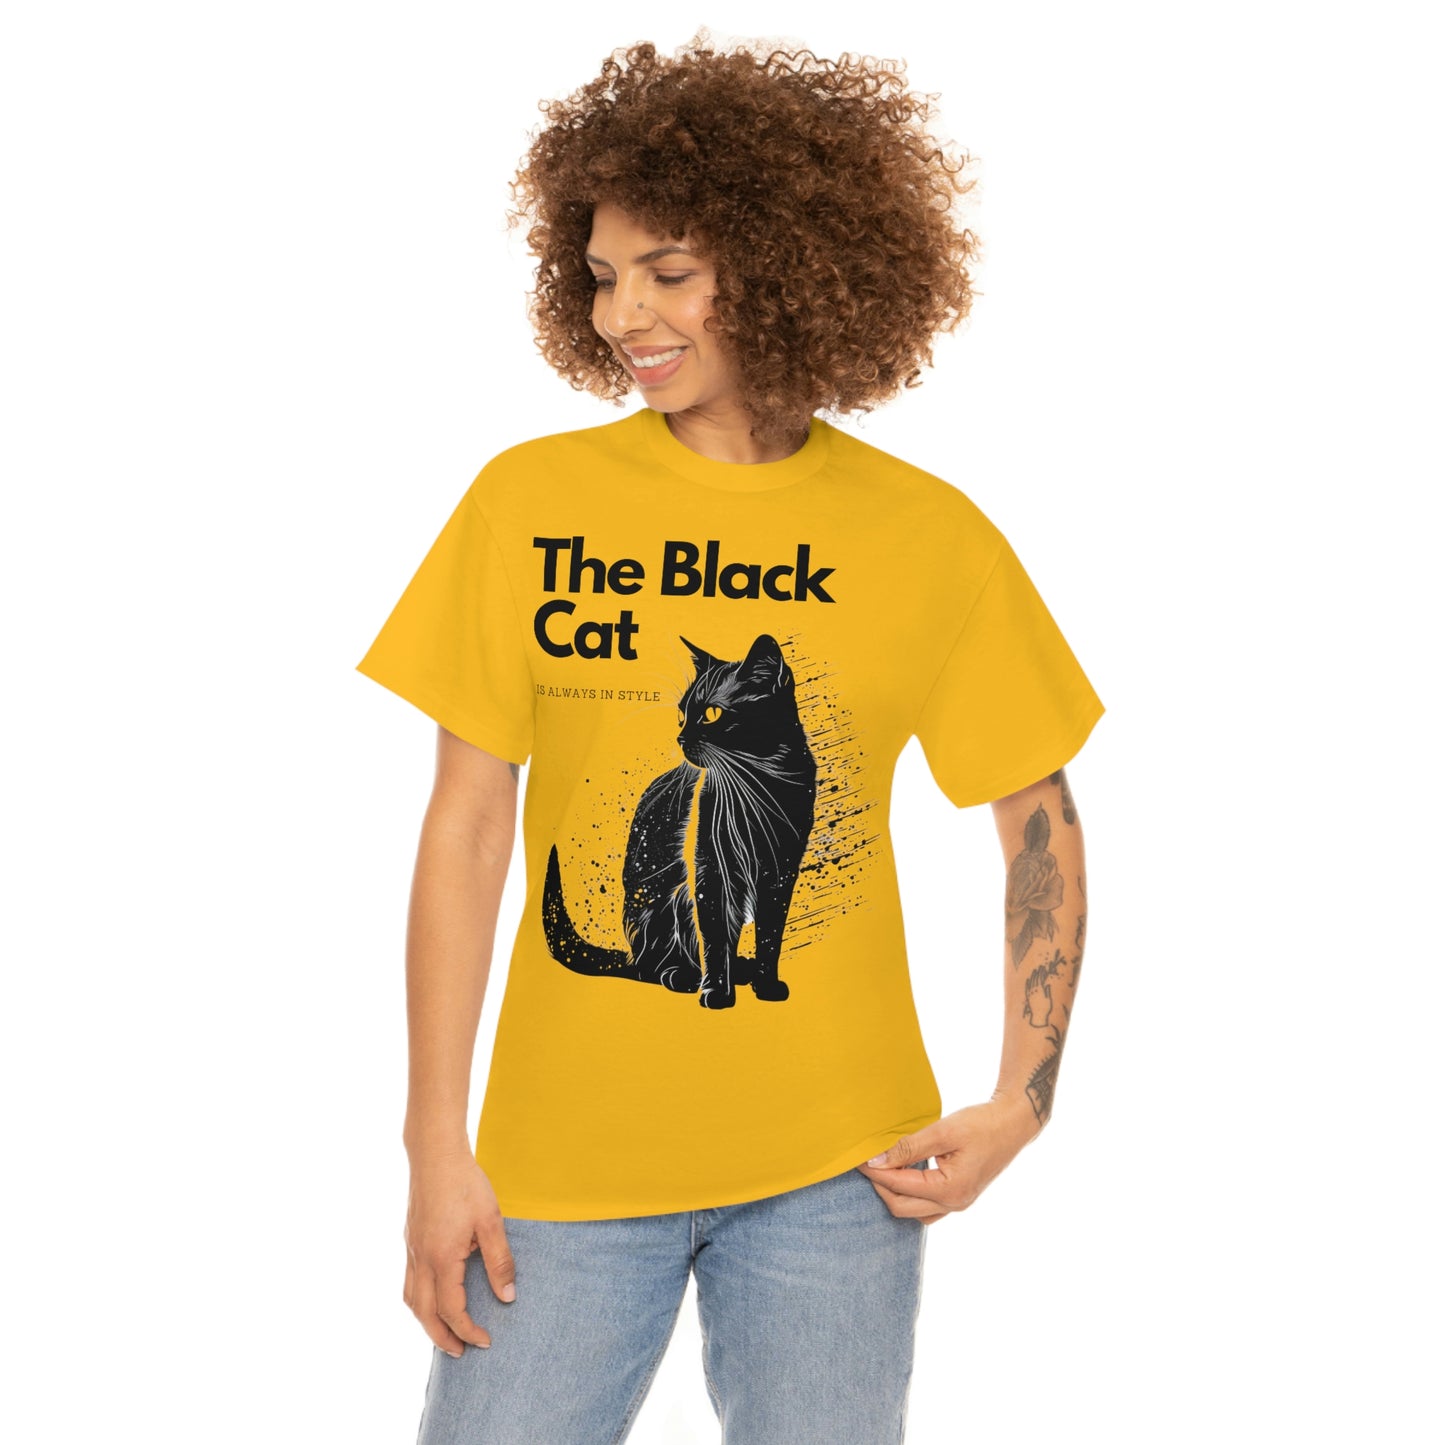 Black Cat always comes in a style - High quality Unisex Heavy Cotton Tee T-Shirt